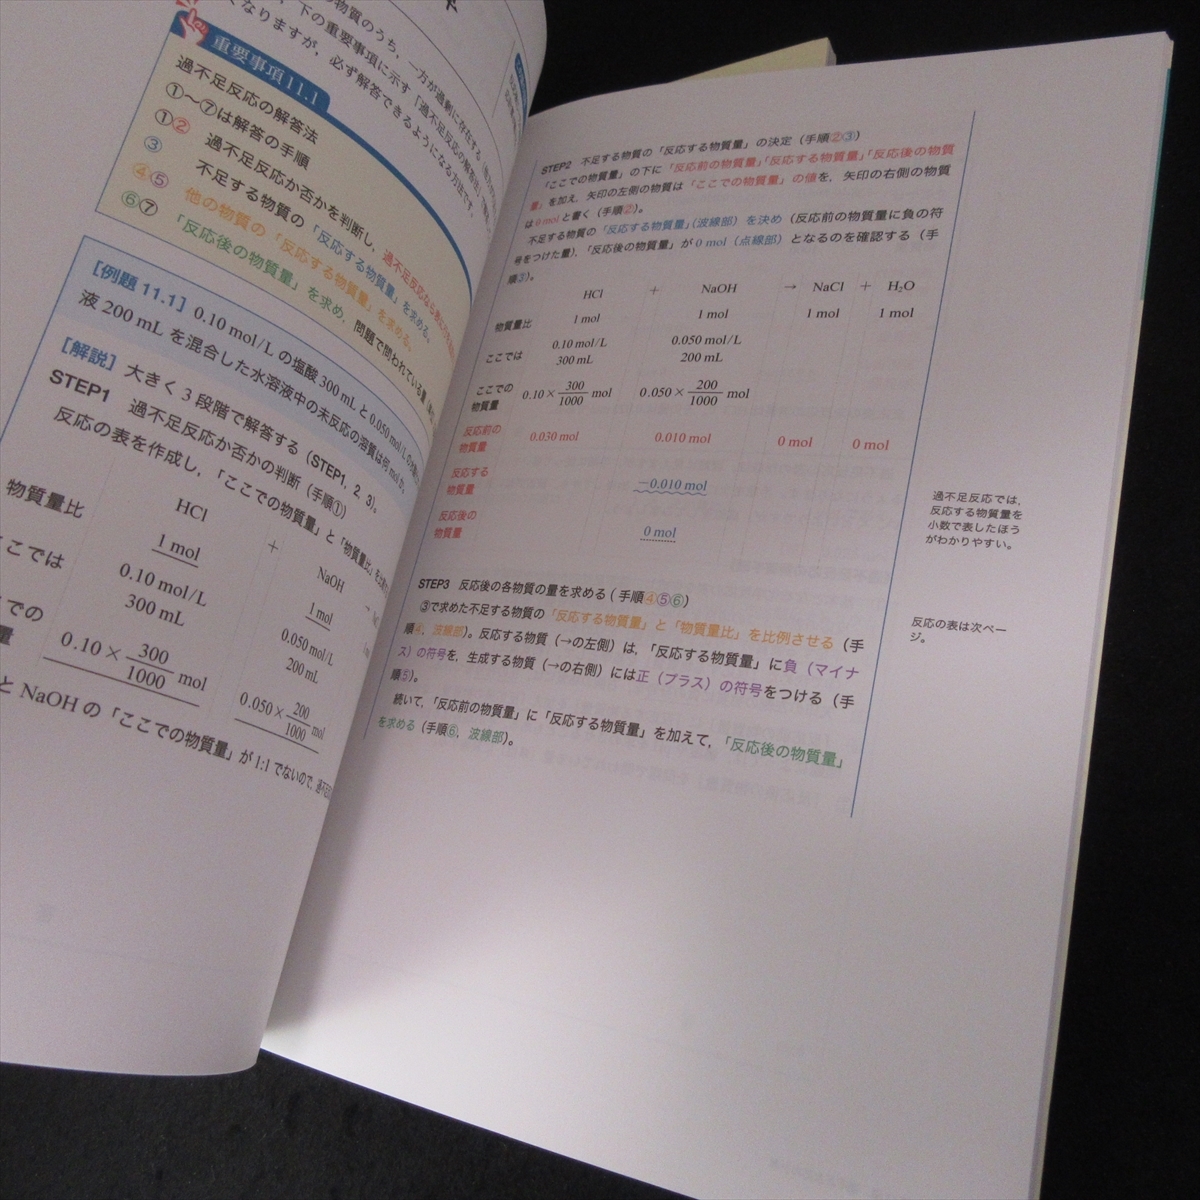  series book@2 pcs. set [ pharmacology group base . therefore have machine chemistry & chemistry count (KS medicine * pharmacology speciality paper )] # sending 170 jpy peace rice field -ply male / tree wistaria . one .. company *